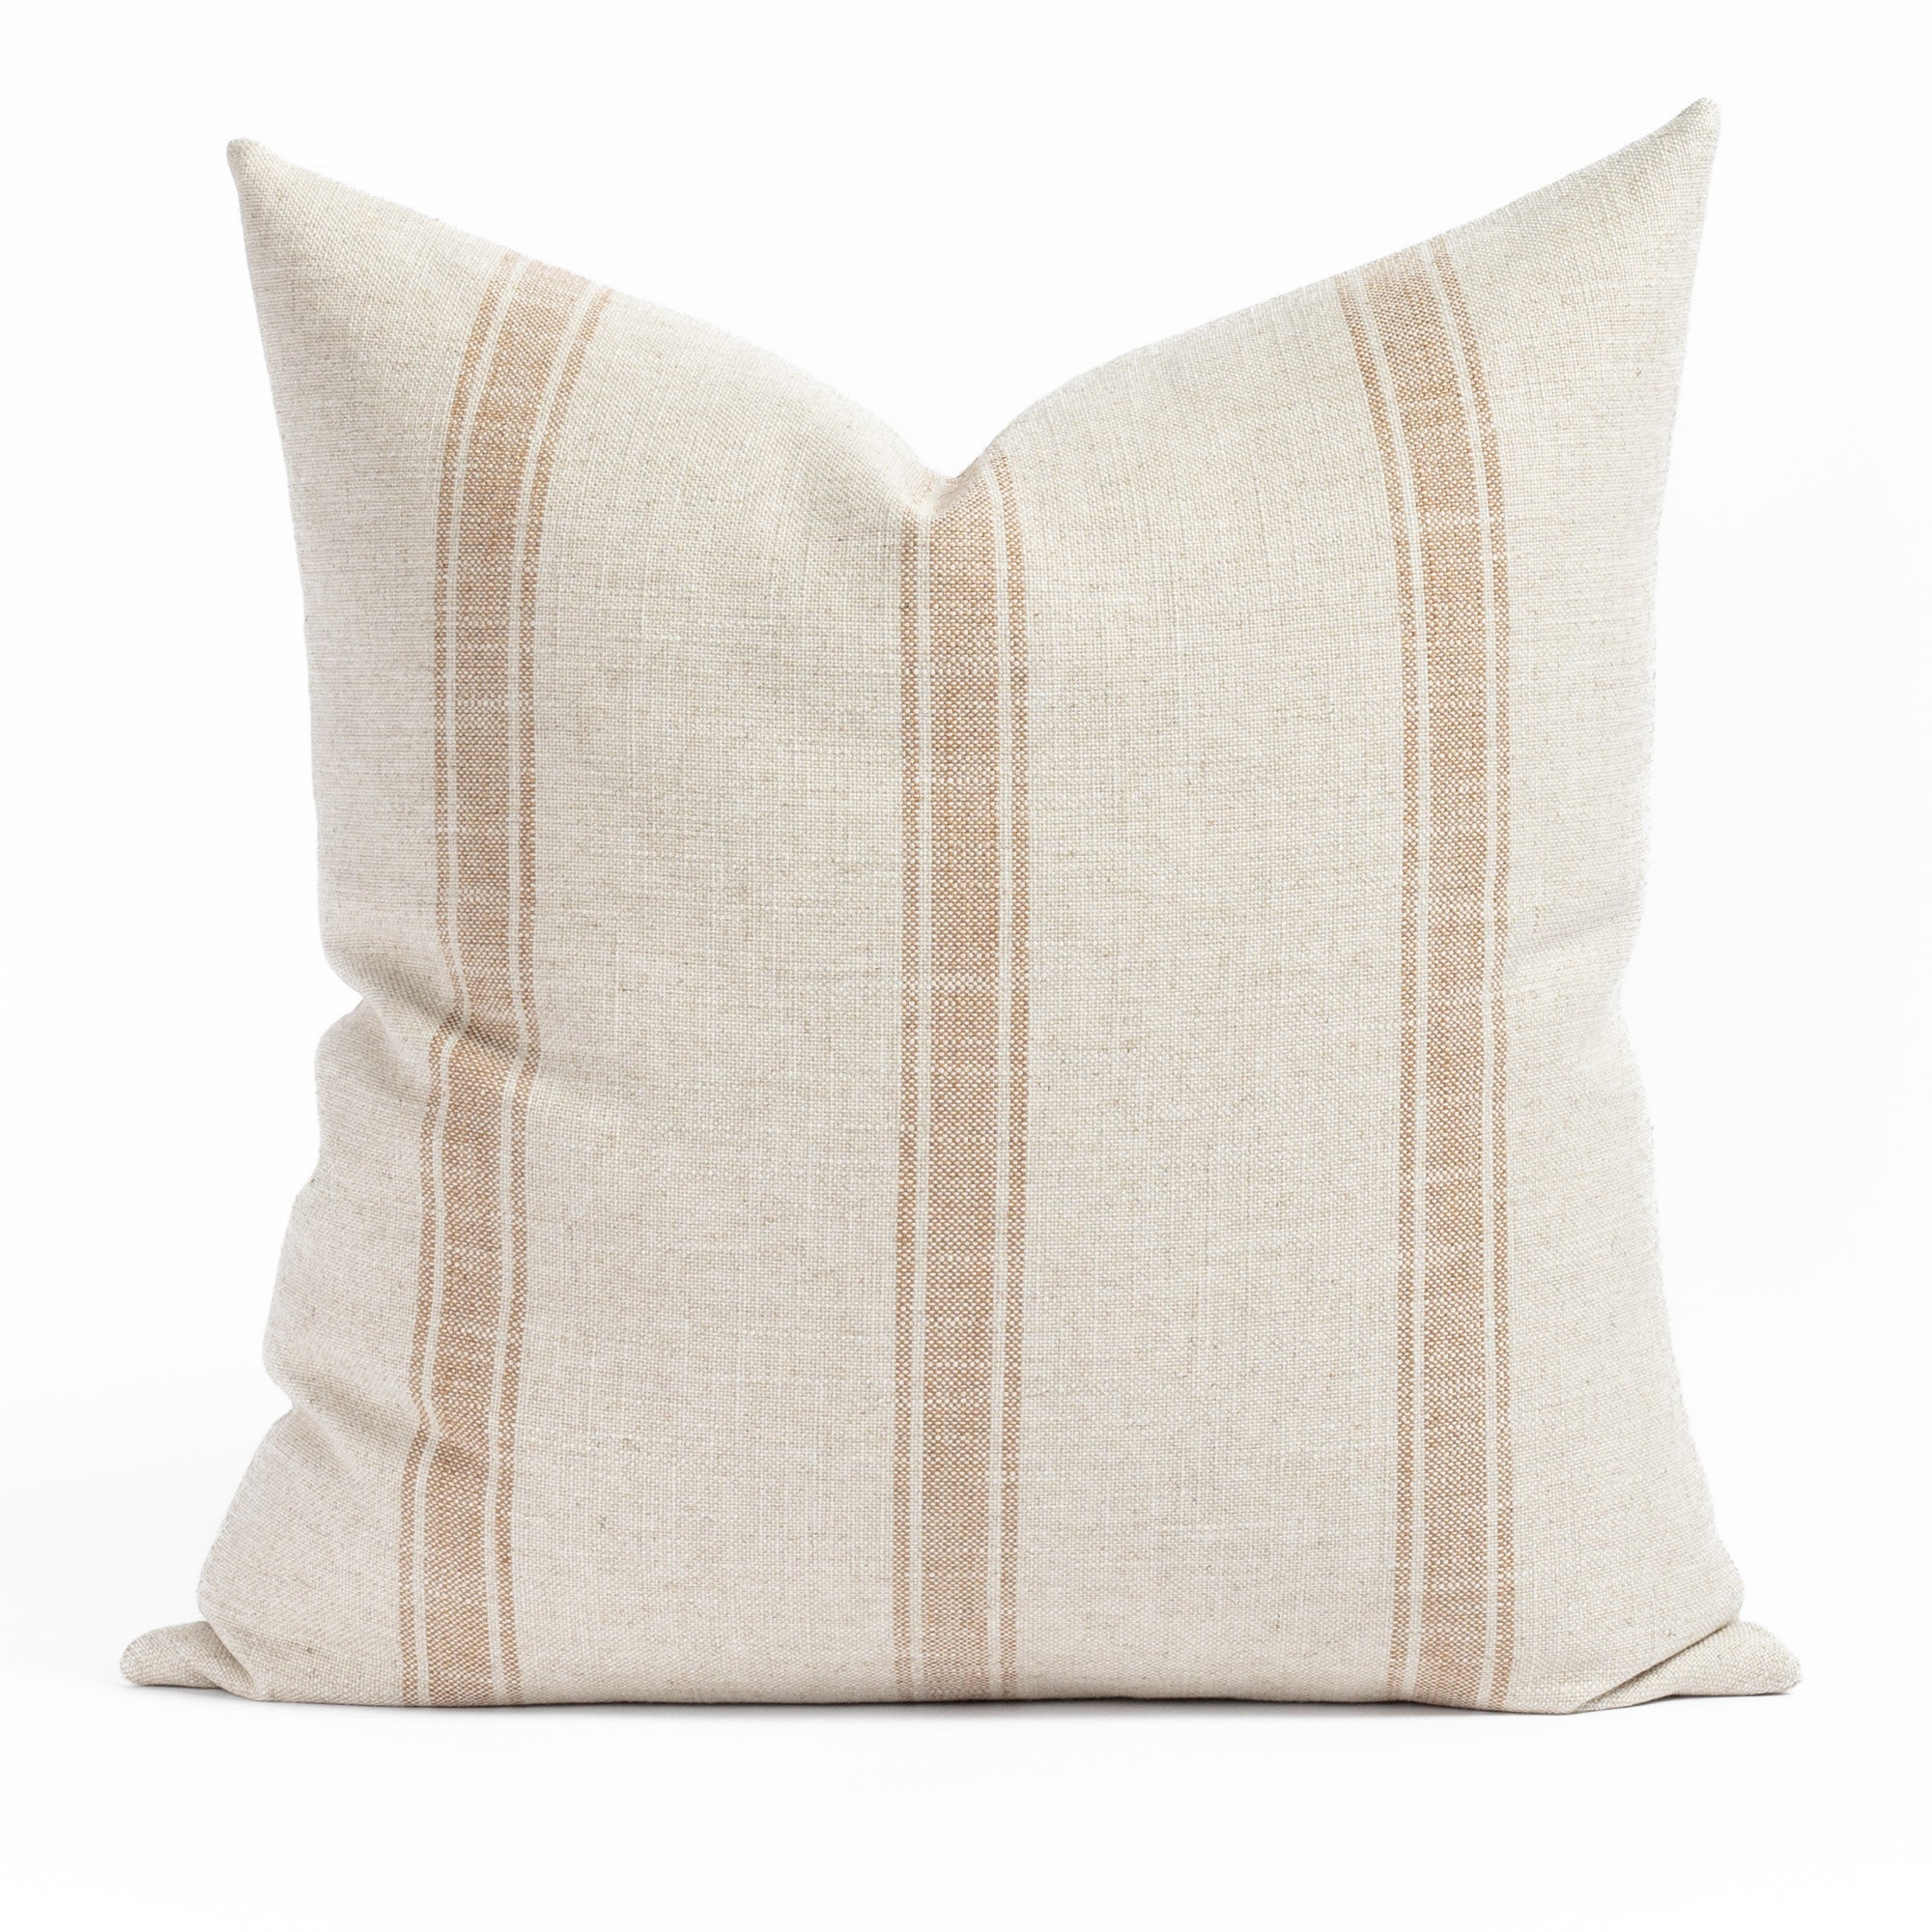 Theo Stripe 22x22 Pillow Rust, an oatmeal cream and faded rust, wide set ticking stripe decorative throw pillow